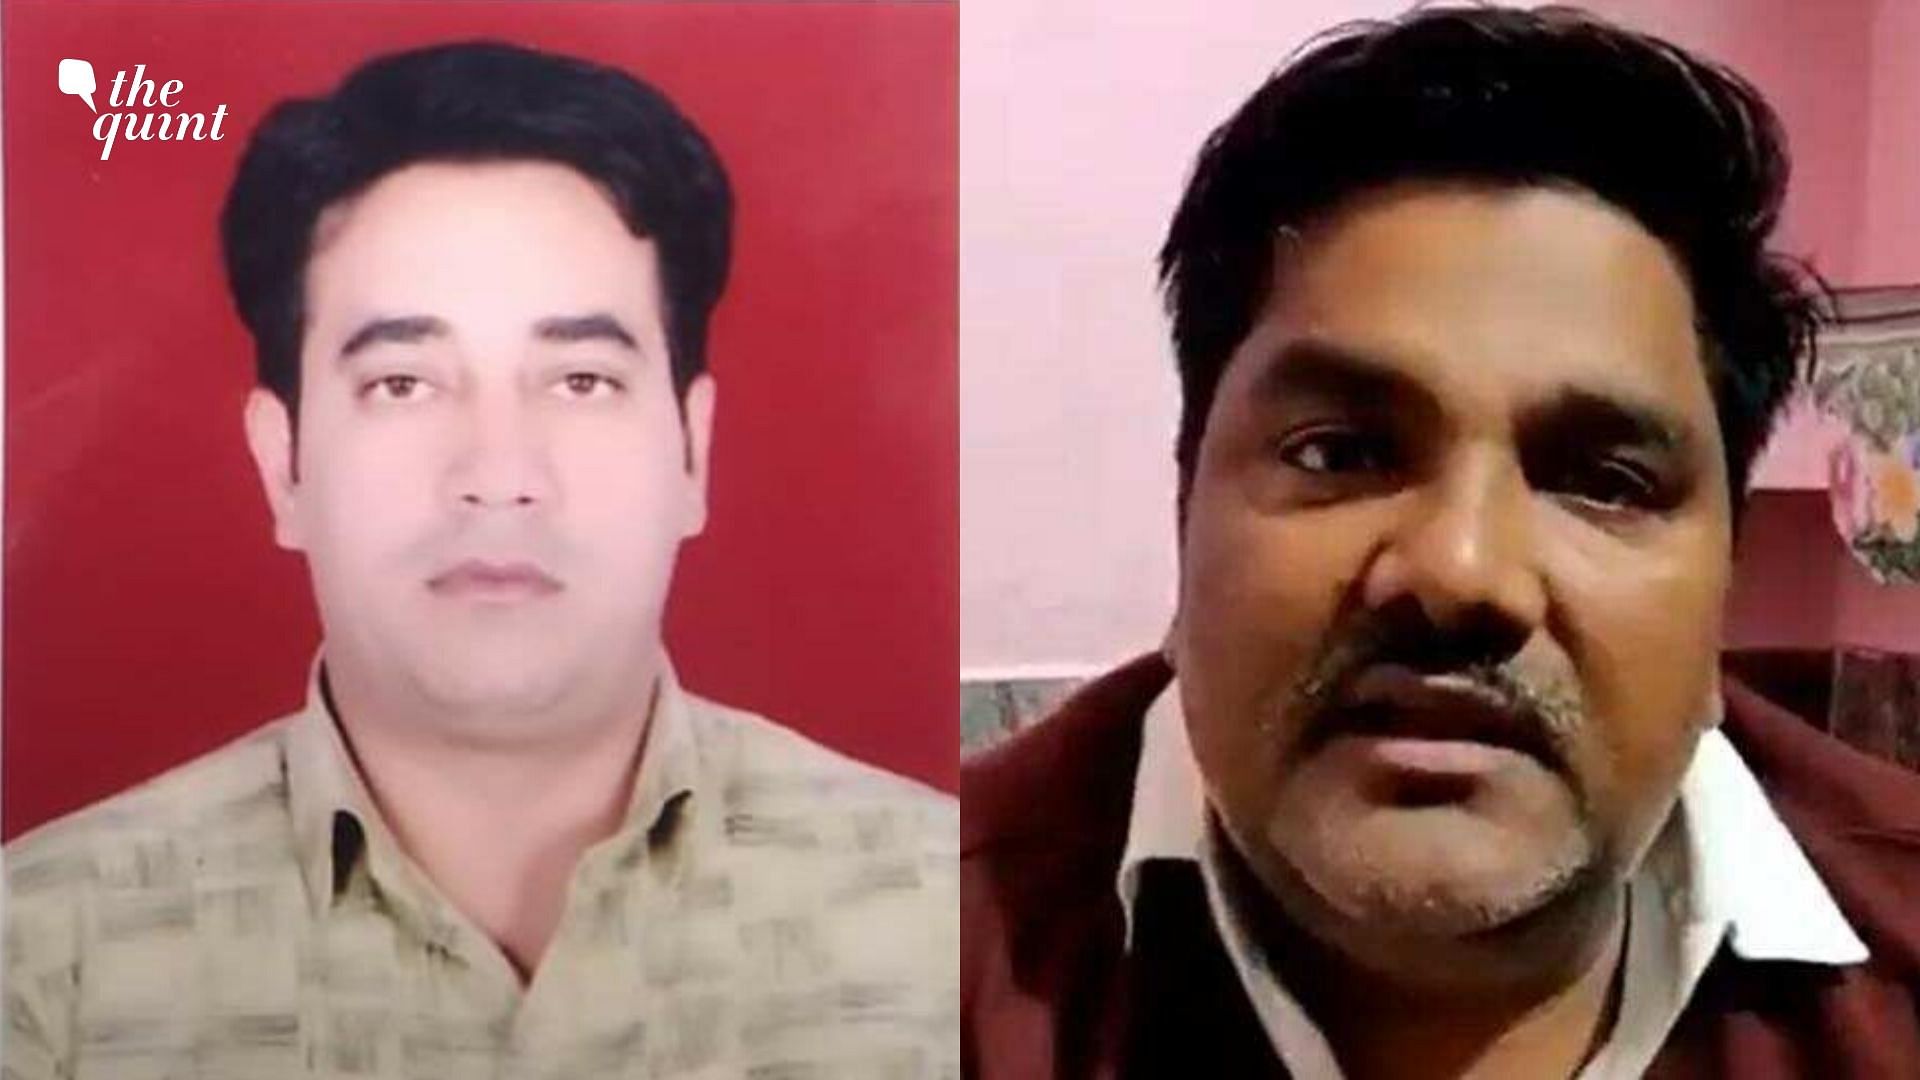 On Thursday, 5 March, Delhi Police arrested former AAP Councillor Tahir Hussain in the death case of an IB officer. 